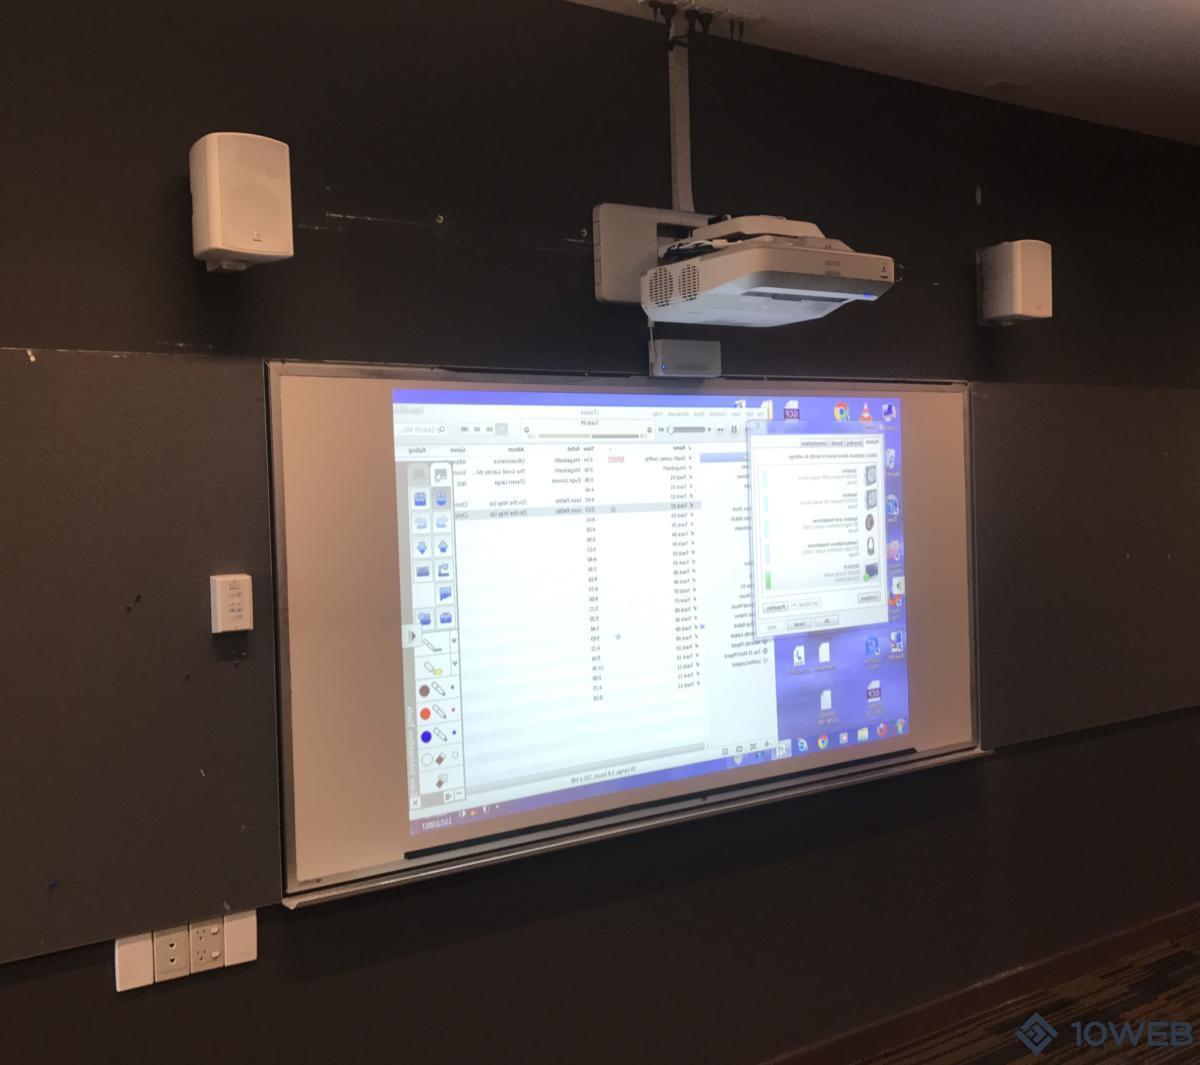 EPSON EB-696Ui Interactive Finger Touch Projector at Caulfield Grammar